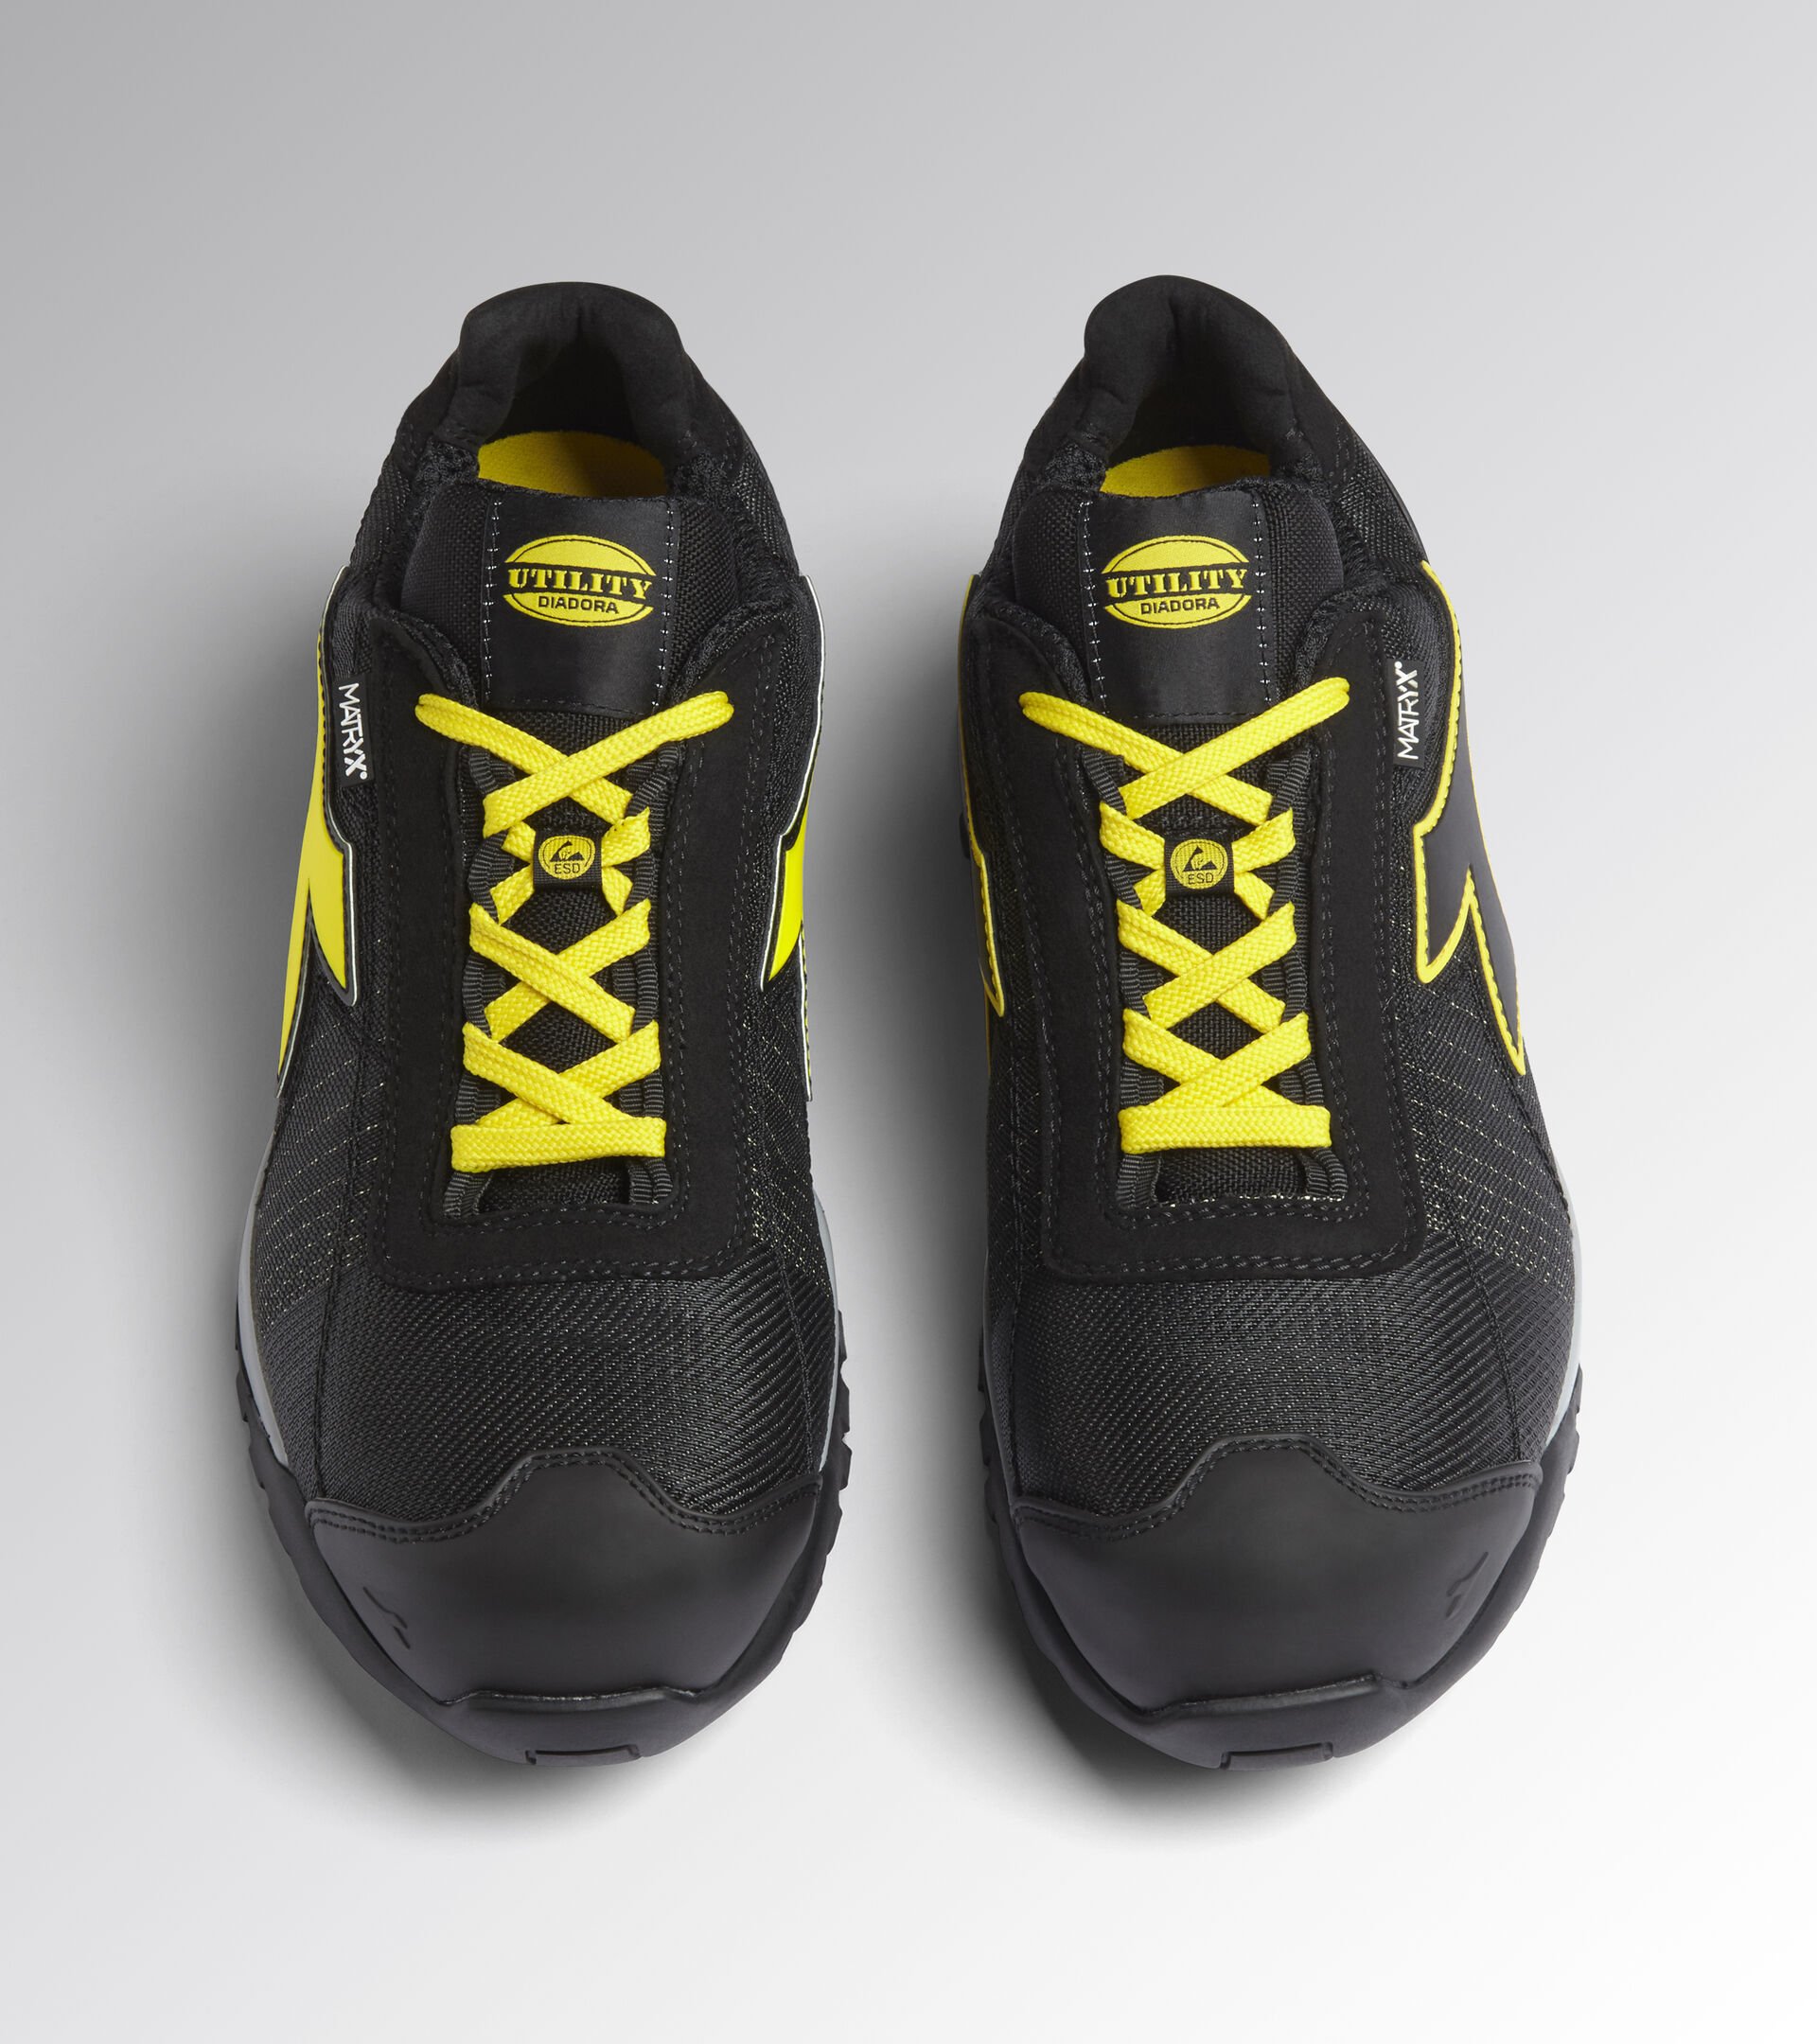 Low safety shoe GLOVE MDS MTX LOW S1P HRO SRC ESD BLACK/YELLOW - Utility